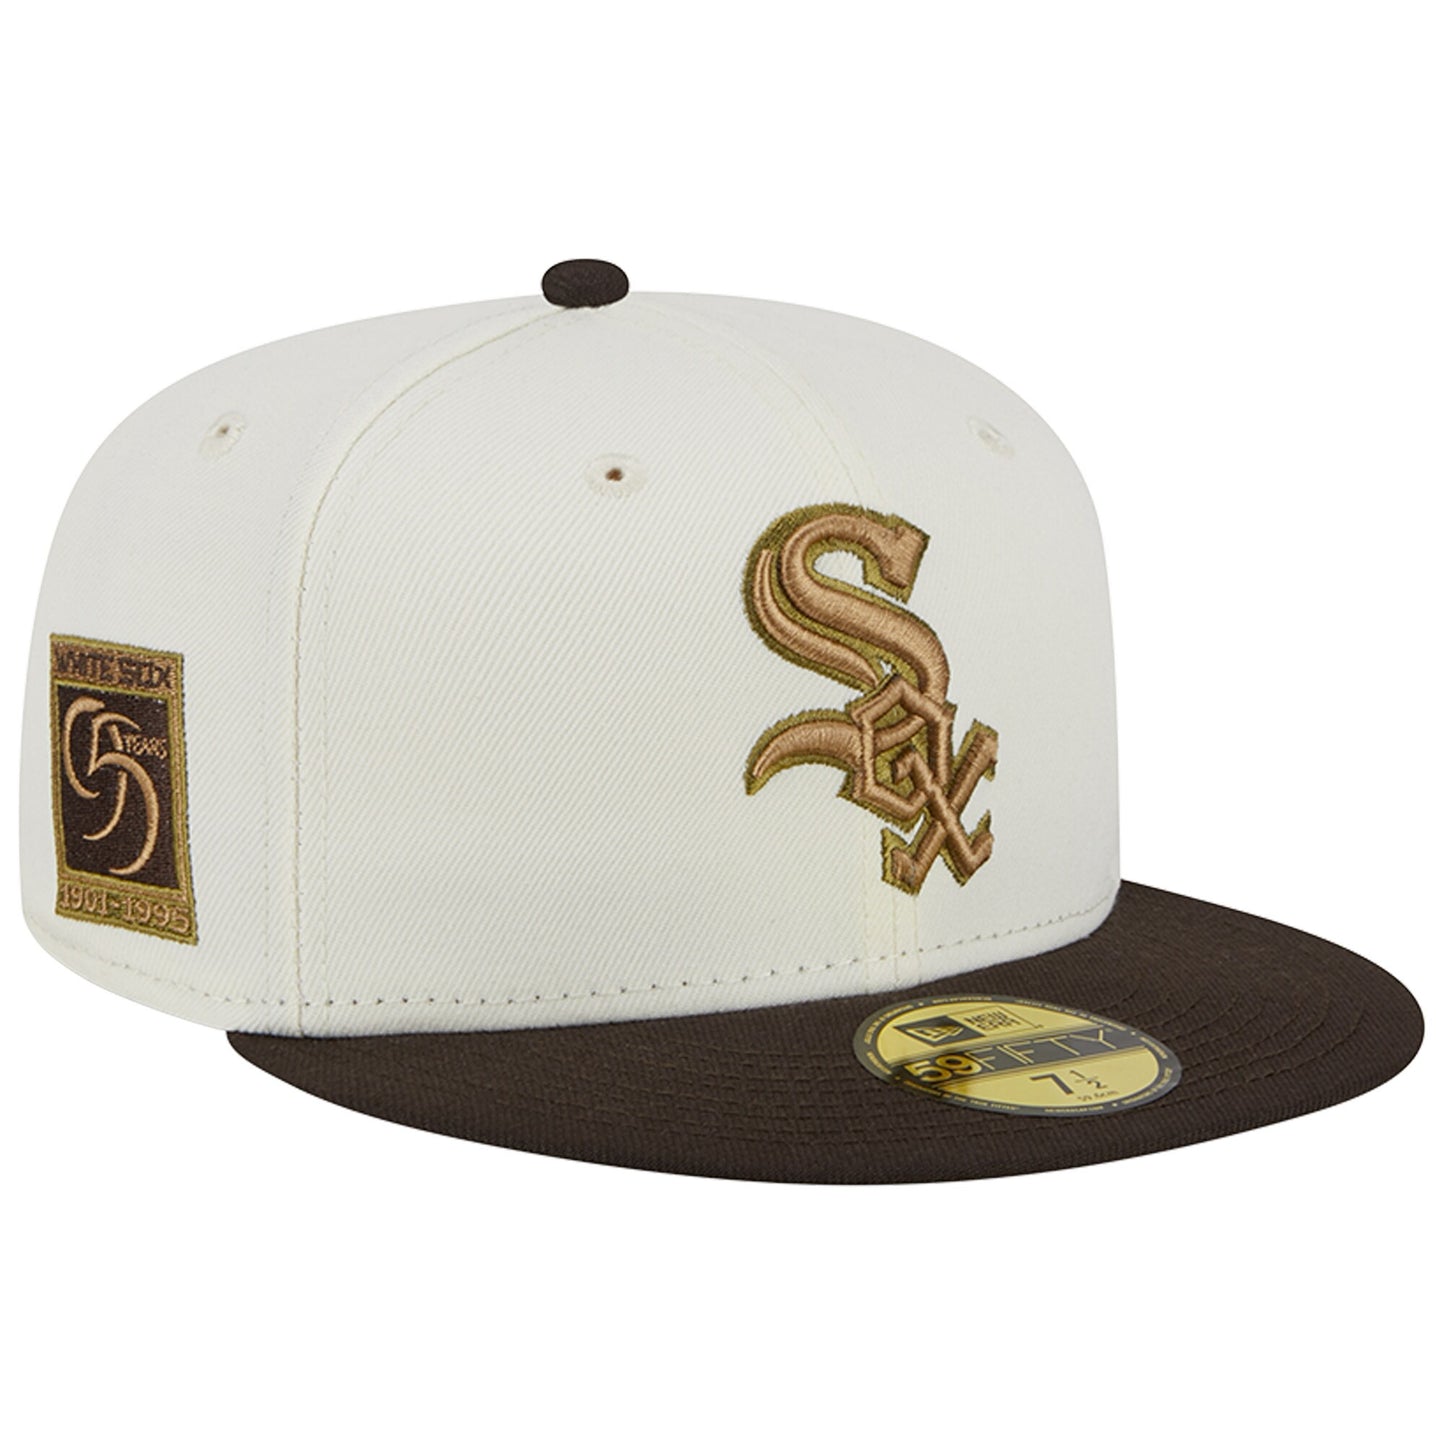 Chicago White Sox New Era 95th Team Anniversary 59FIFTY Fitted Hat - White/Brown